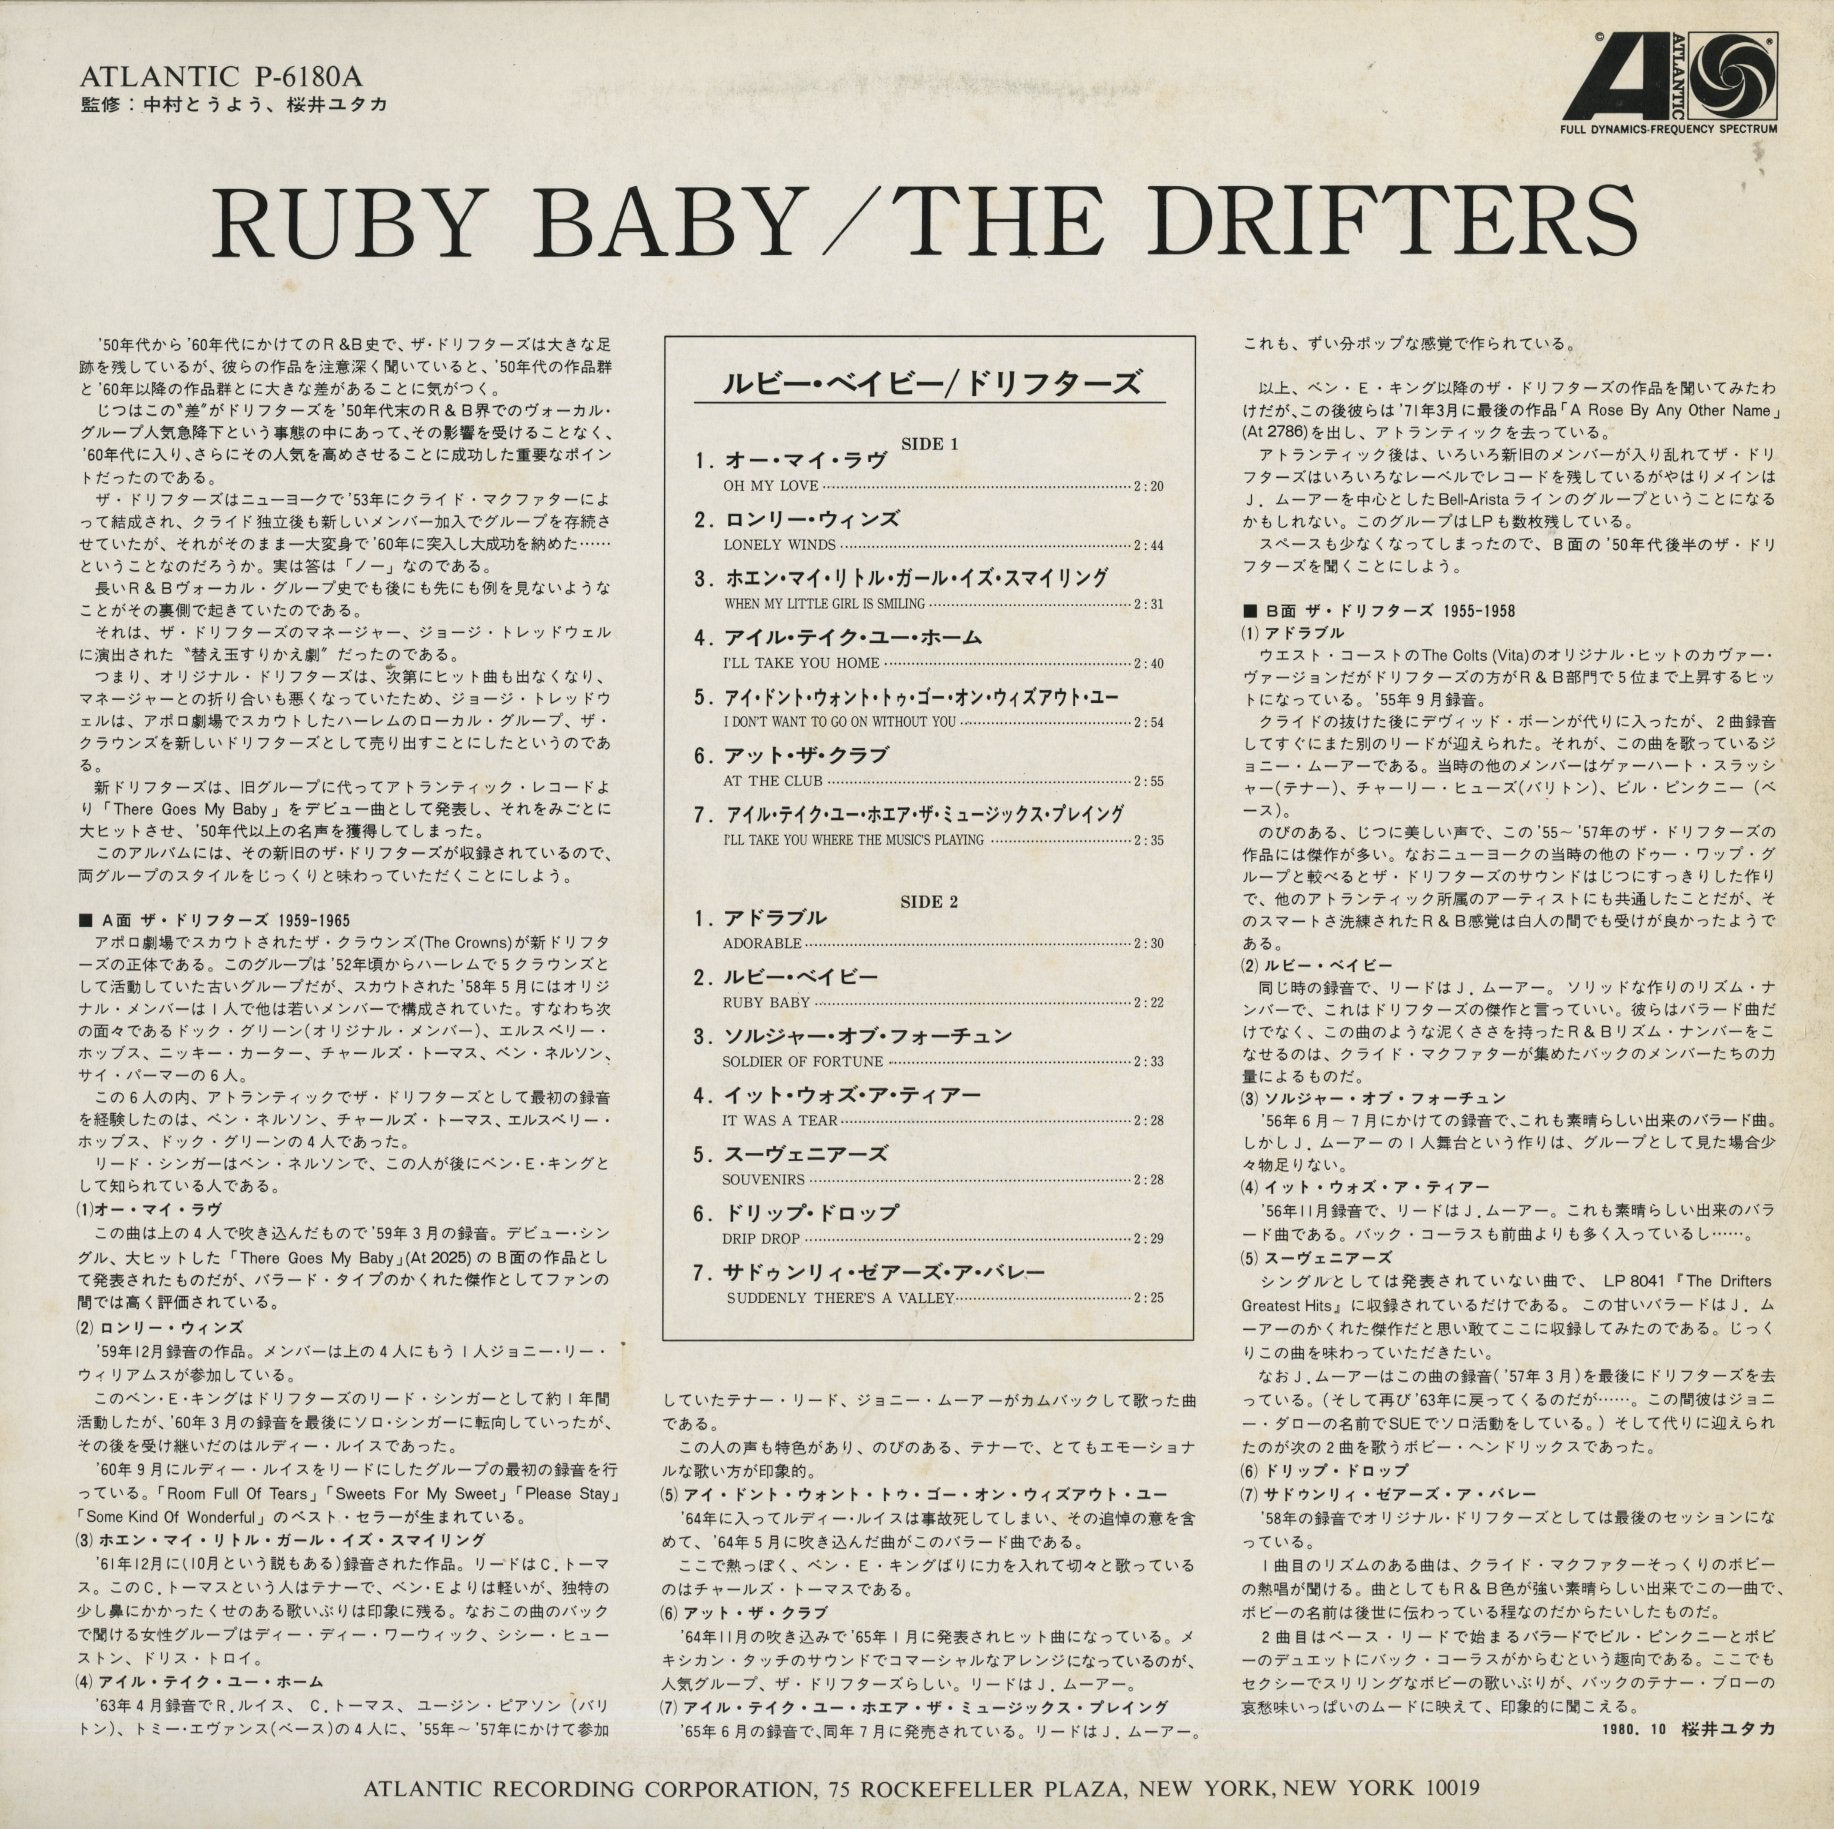 The Drifters / ドリフターズ / Ruby Baby (P-6180A) – VOXMUSIC WEBSHOP